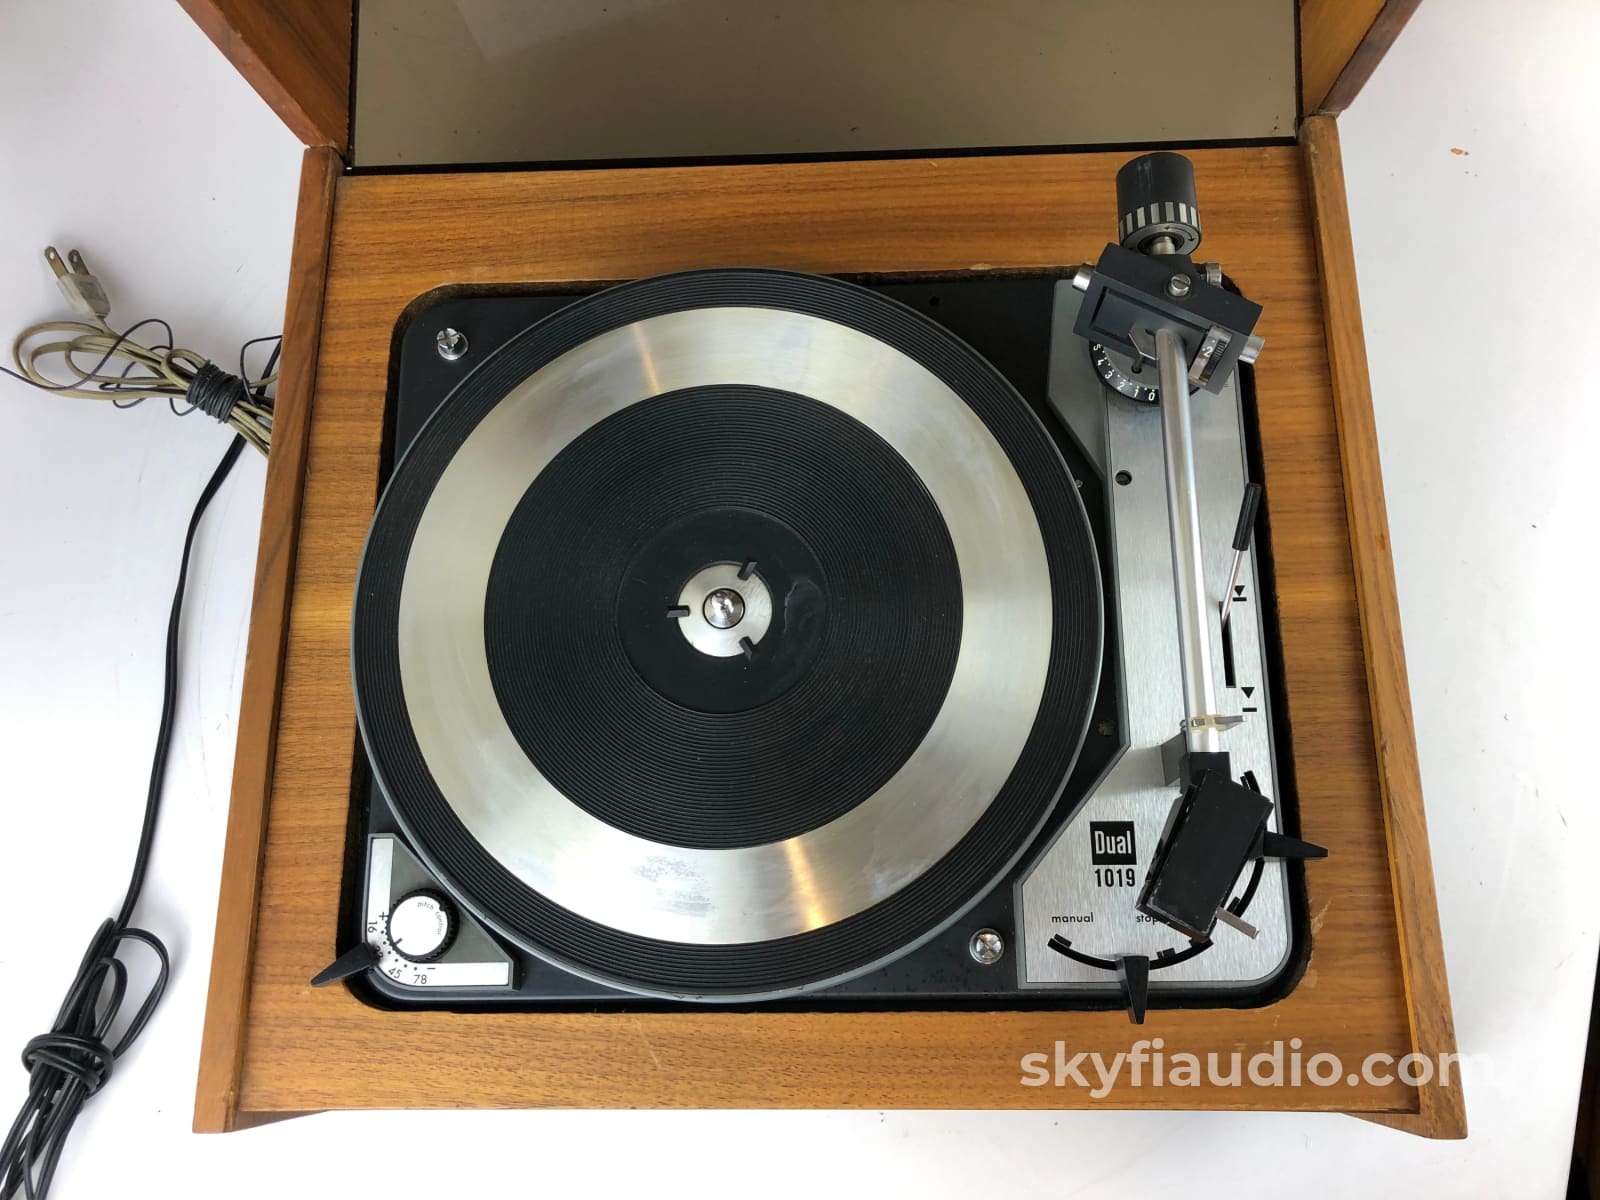 United Audio Dual 1019 Vintage Turntable With New Grado Gold2 Cartridge